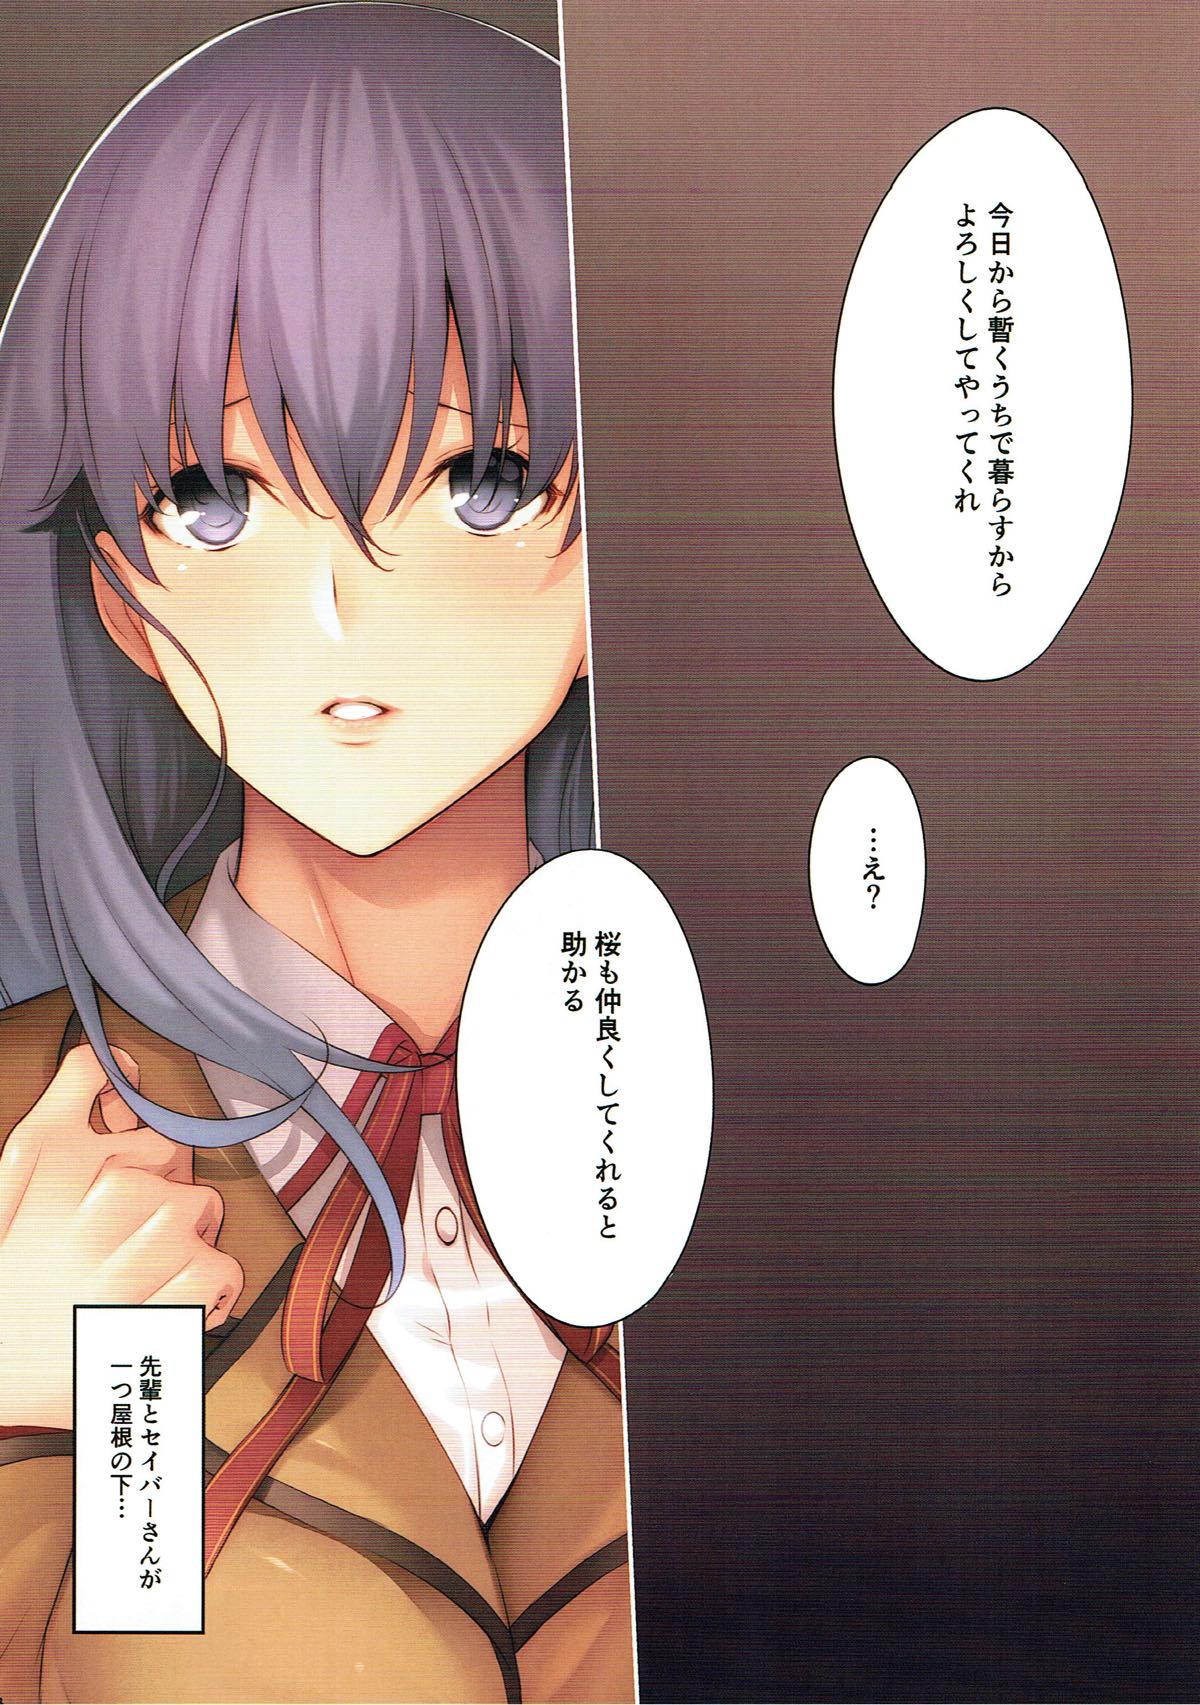 Tgirl THE BOOK OF SAKURA - Fate stay night Chastity - Page 3